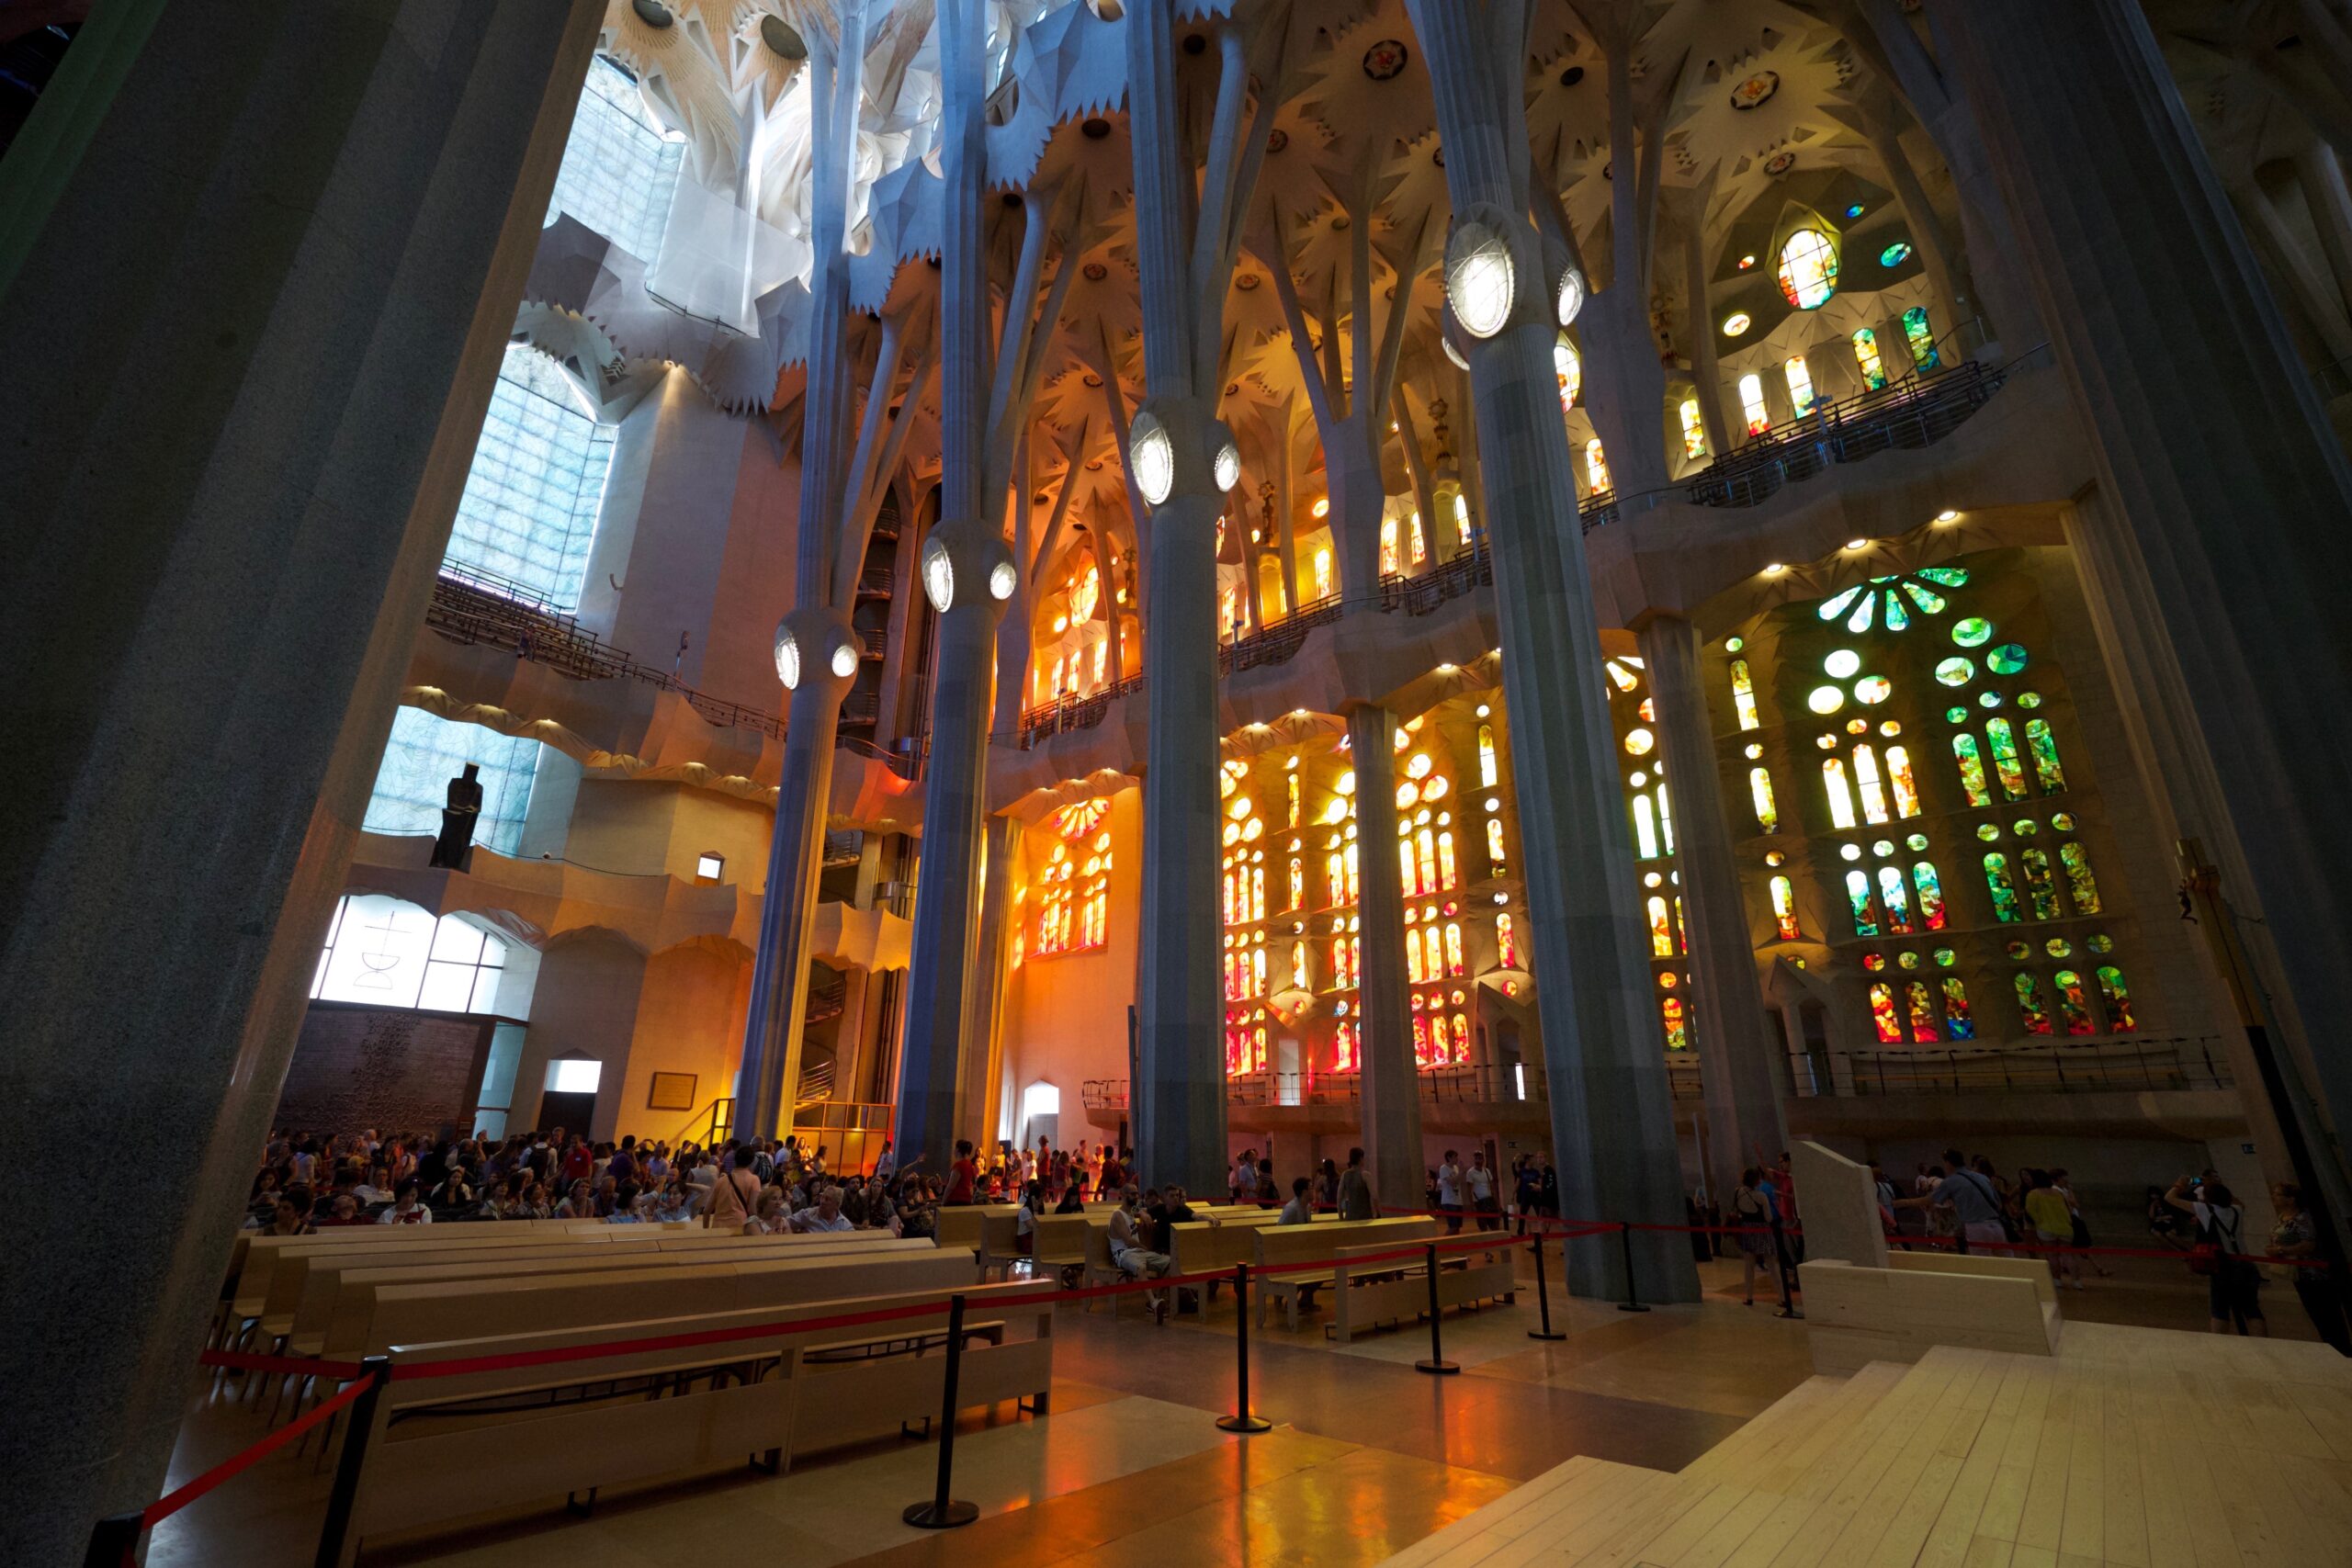 The inside of the Sagrada Familia with colourful light coming through the stain glass windows